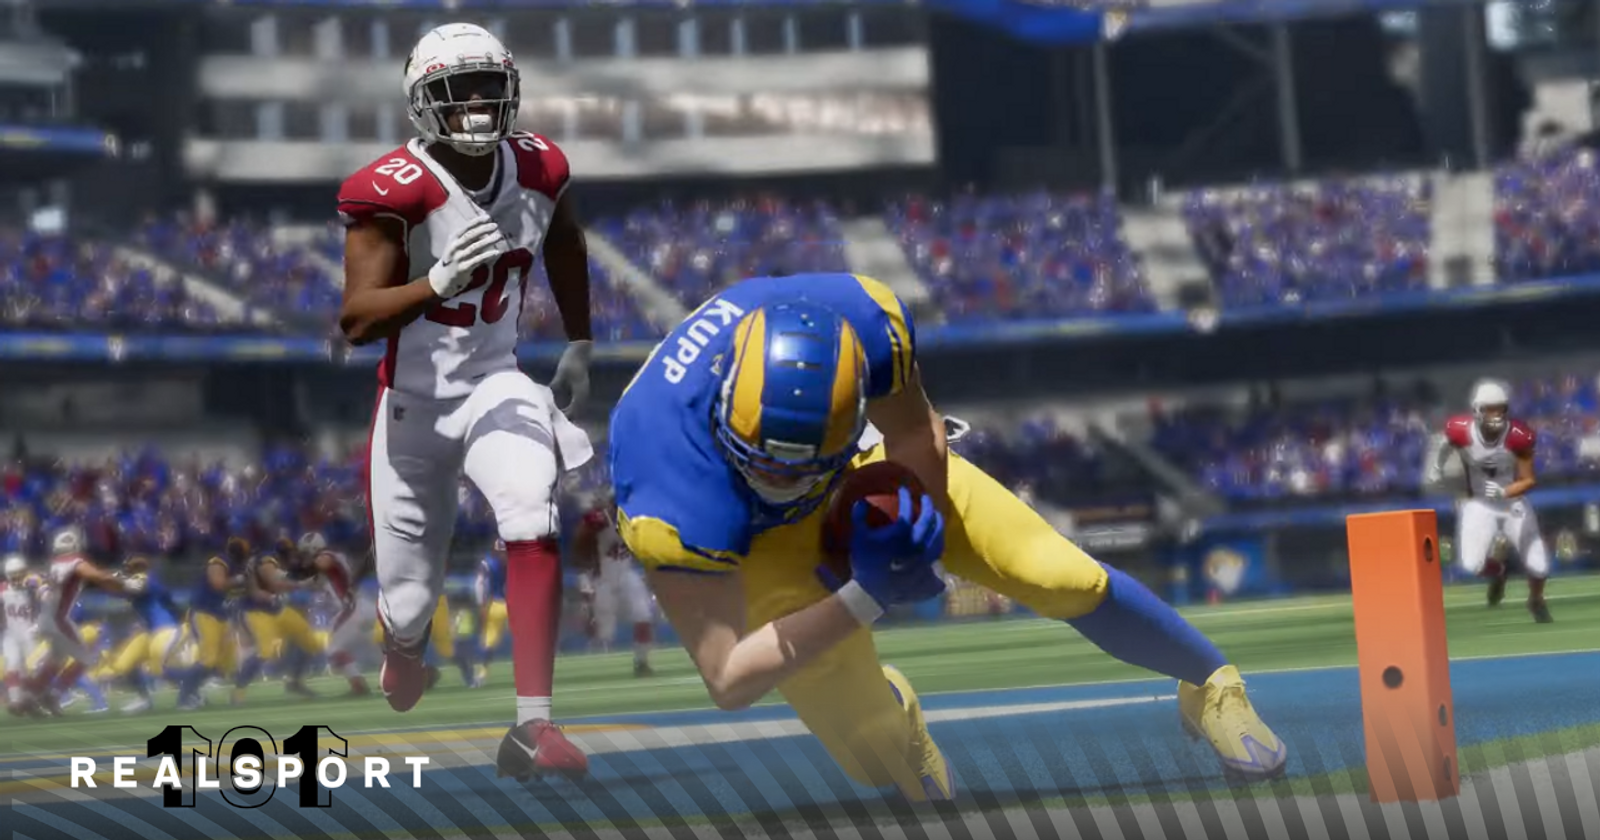 Madden 23 Franchise Mode new features explained, major Free Agency upgrades